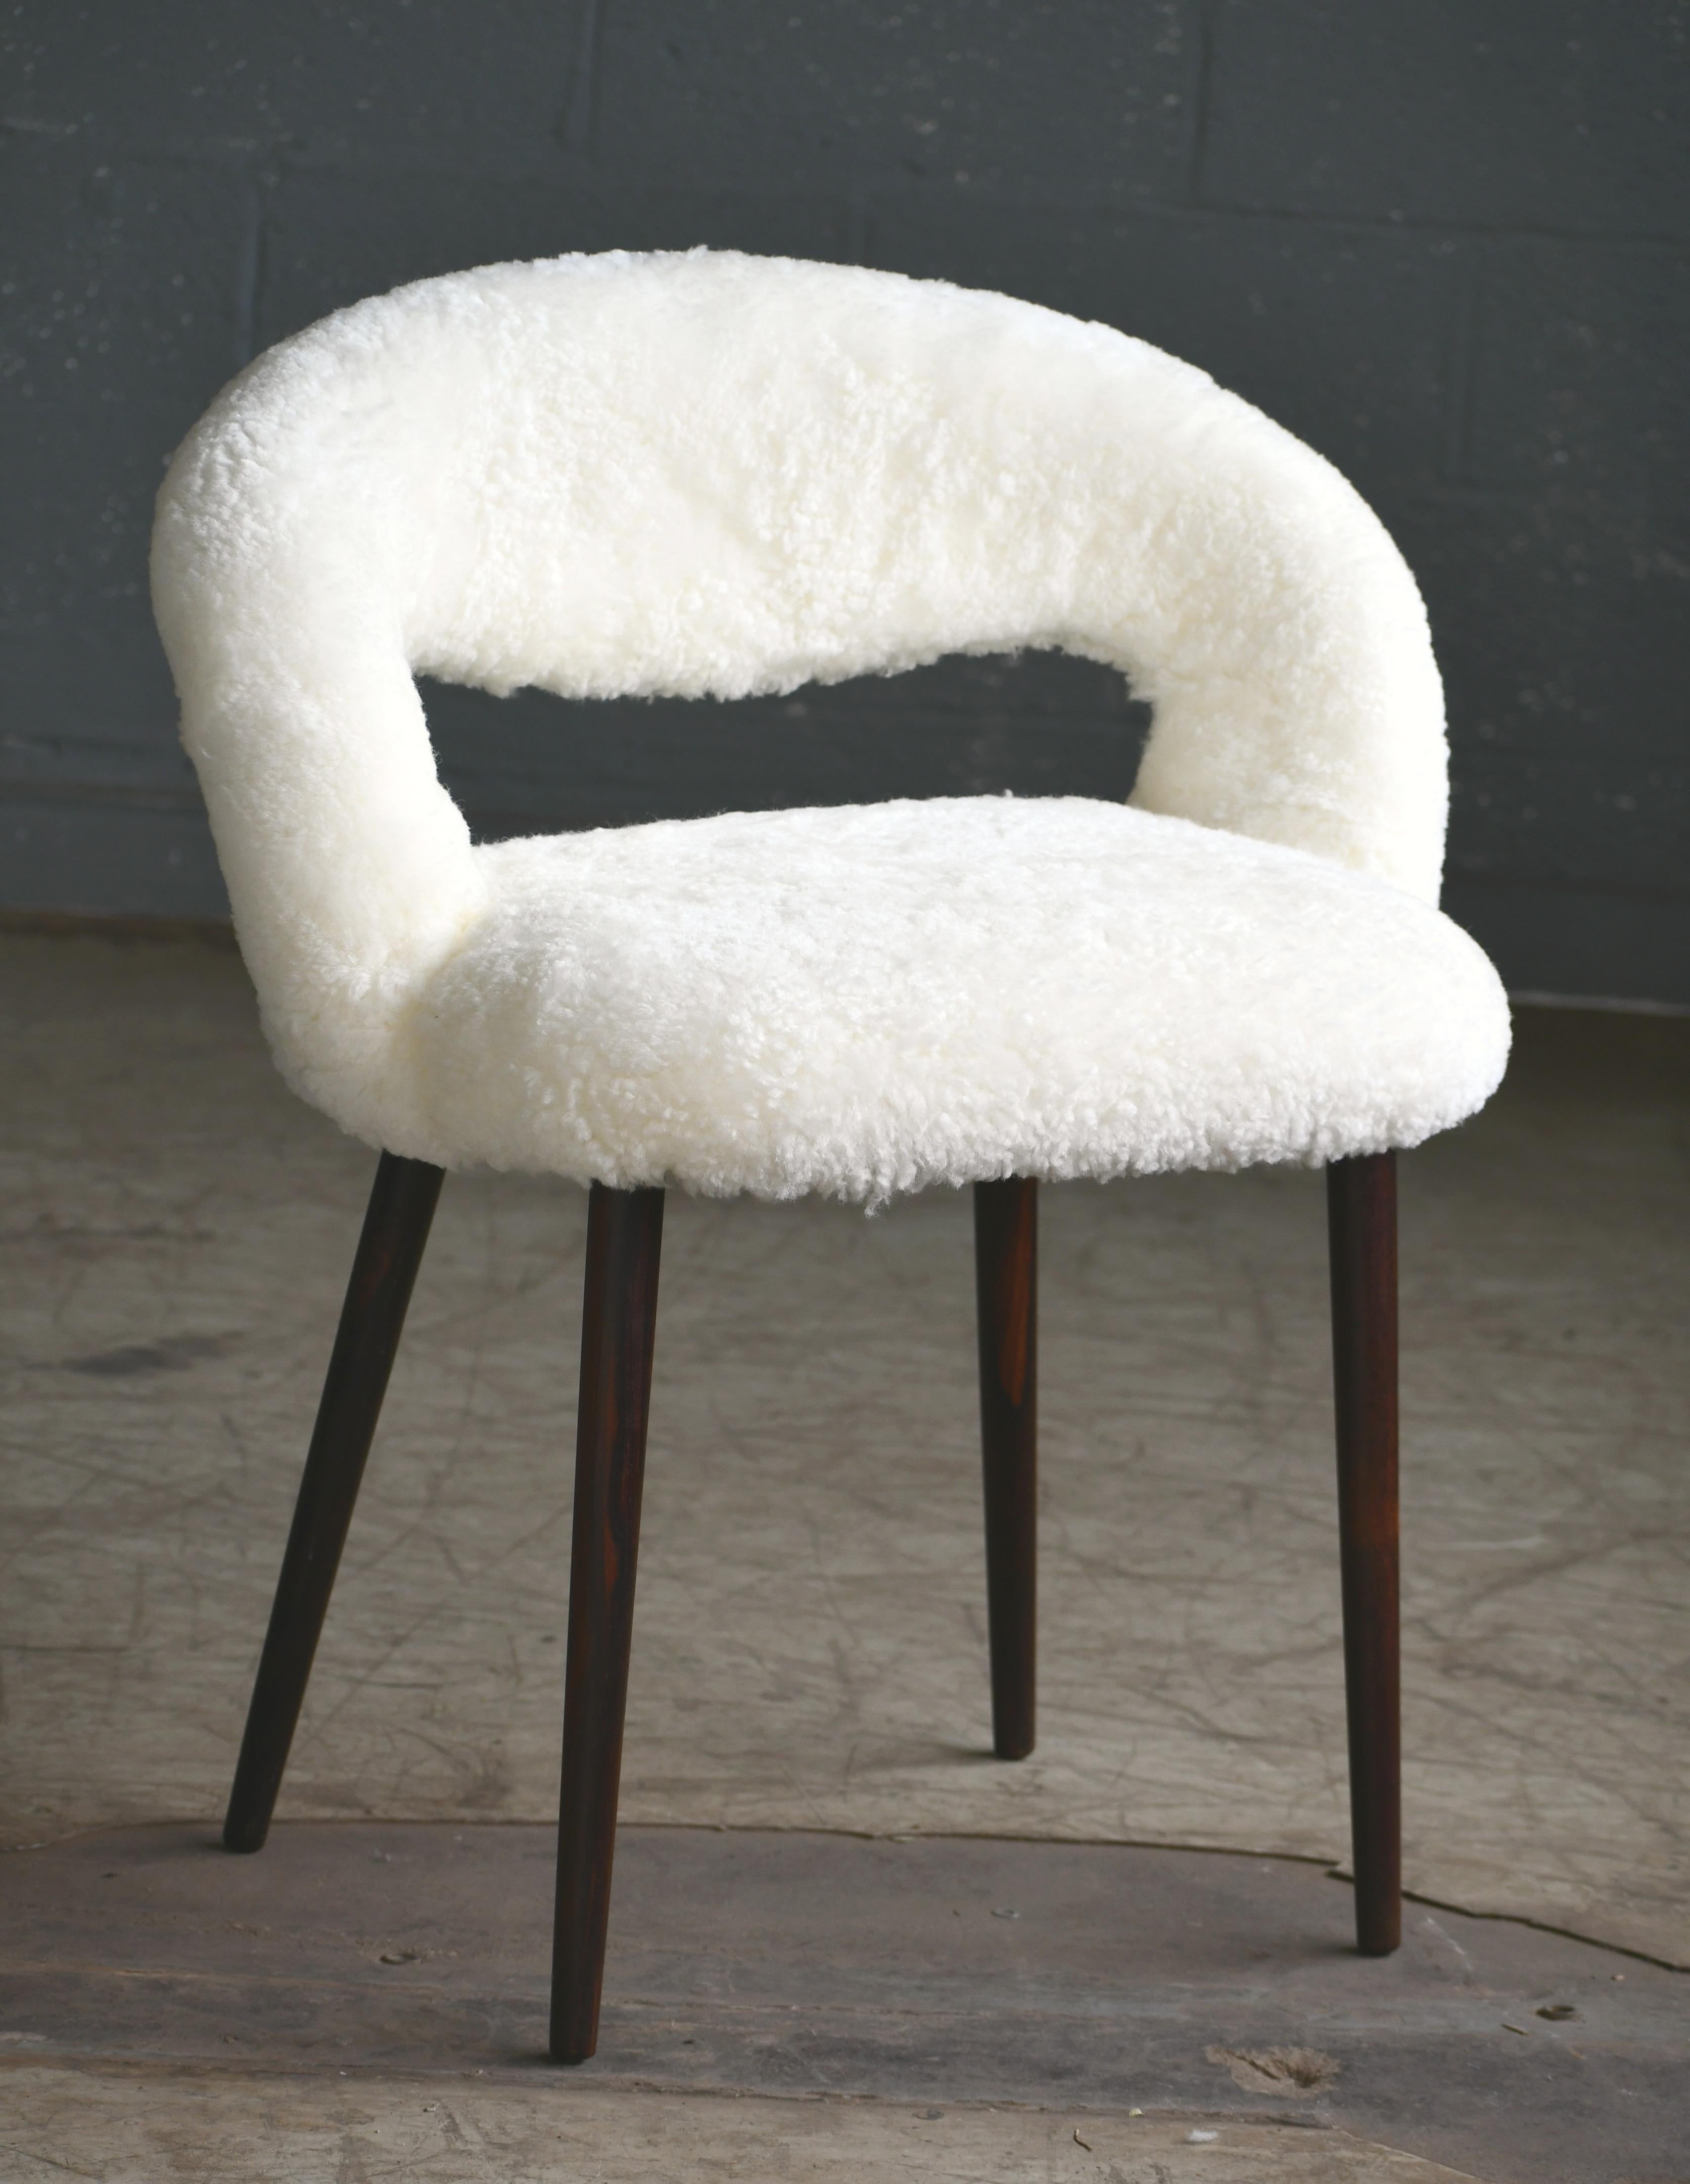 Super stylish, comfortable and highly coveted dressing or vanity chair by Frode Holm made in the 1950s. The chair is newly upholstered genuine shearling and is a fantastic addition of luxury to any bedroom or powder room. Great vintage condition